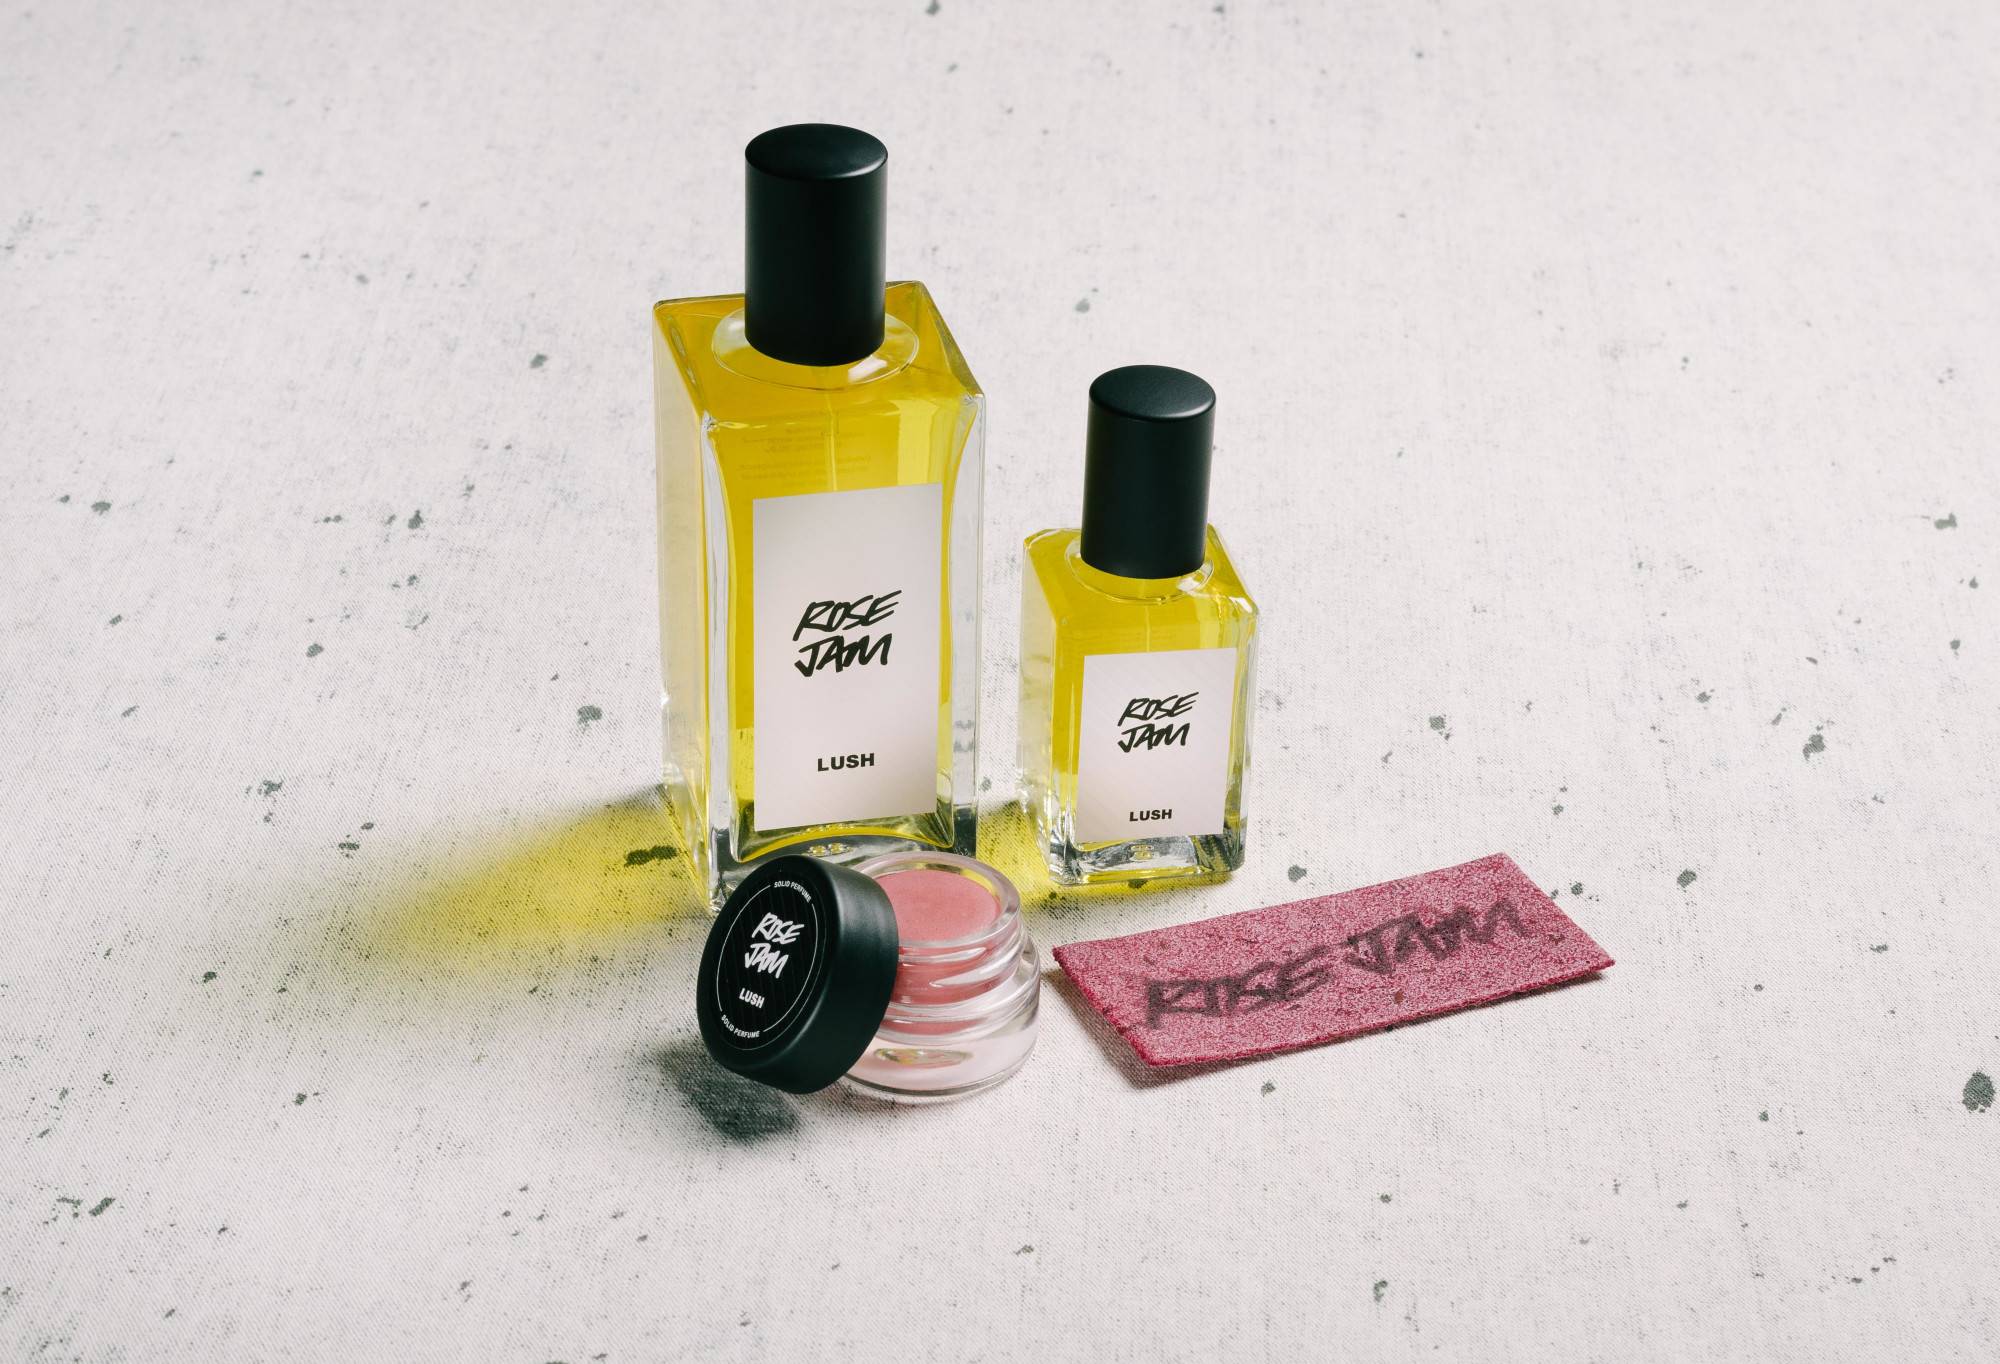 The whole Rose Jam fragrance collection (bar body spray) is displayed on a white surface, flecked with grey.